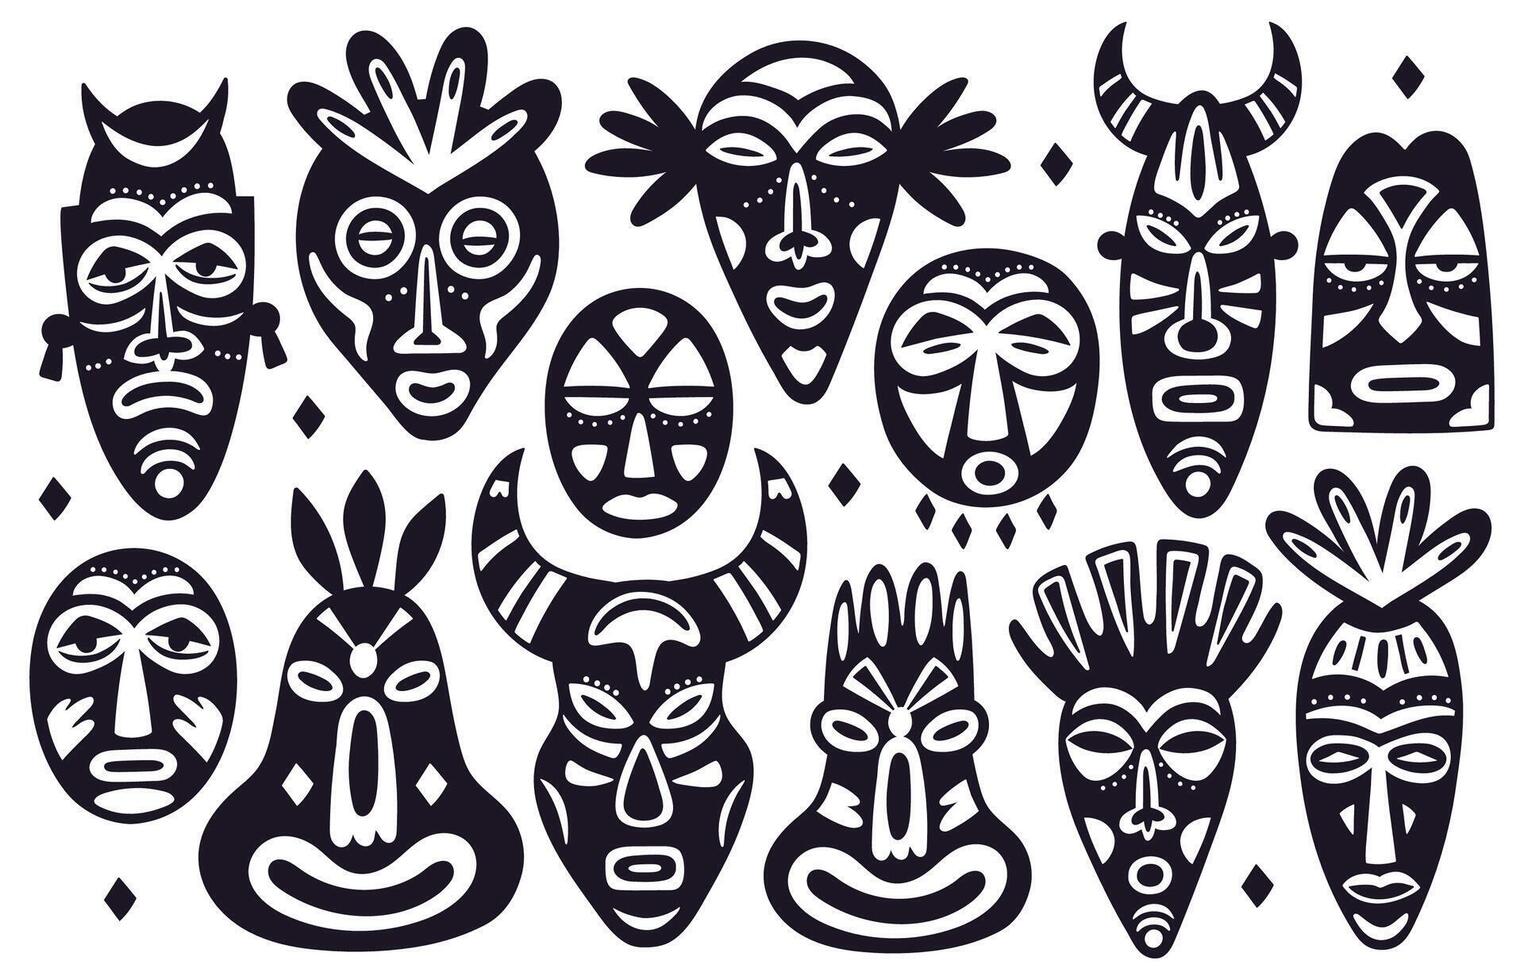 Tribal masks silhouettes. African ancient totem religion face masks, hand drawn hawaii ethnic face masks, ritual masks vector illustration set